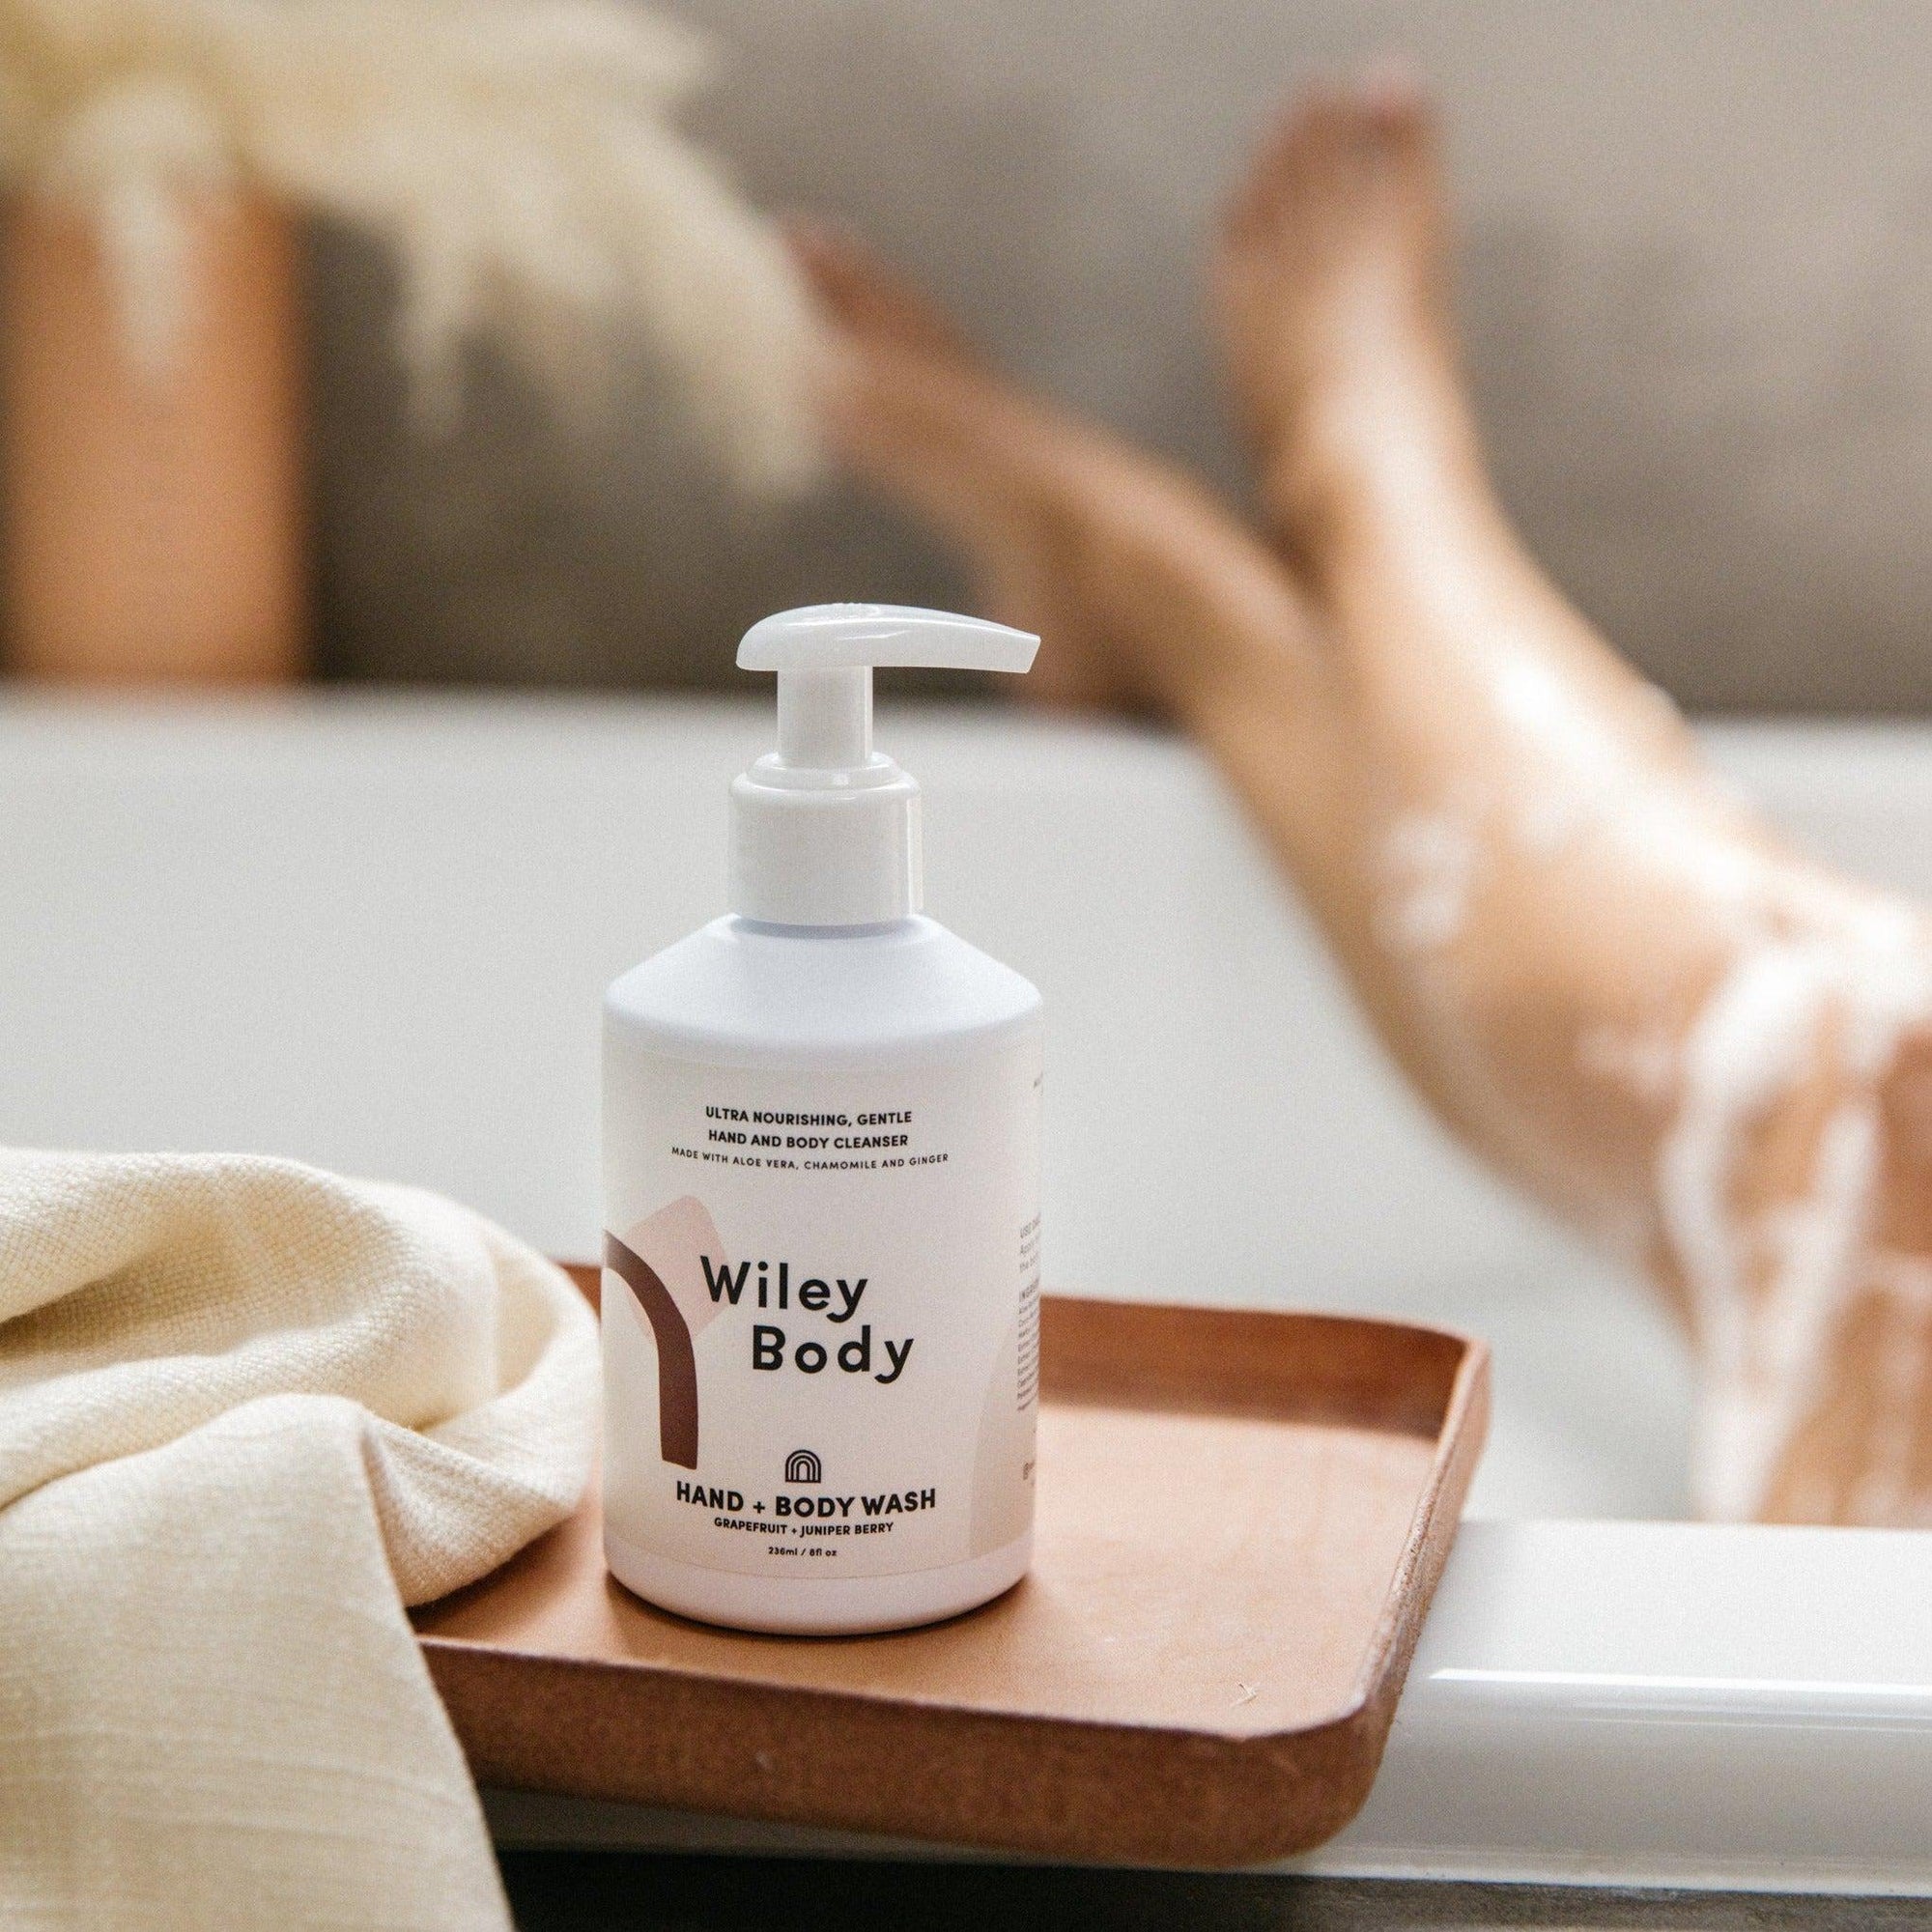 A bottle of Wiley Body hand & body wash sitting on a tray next to a woman's legs.